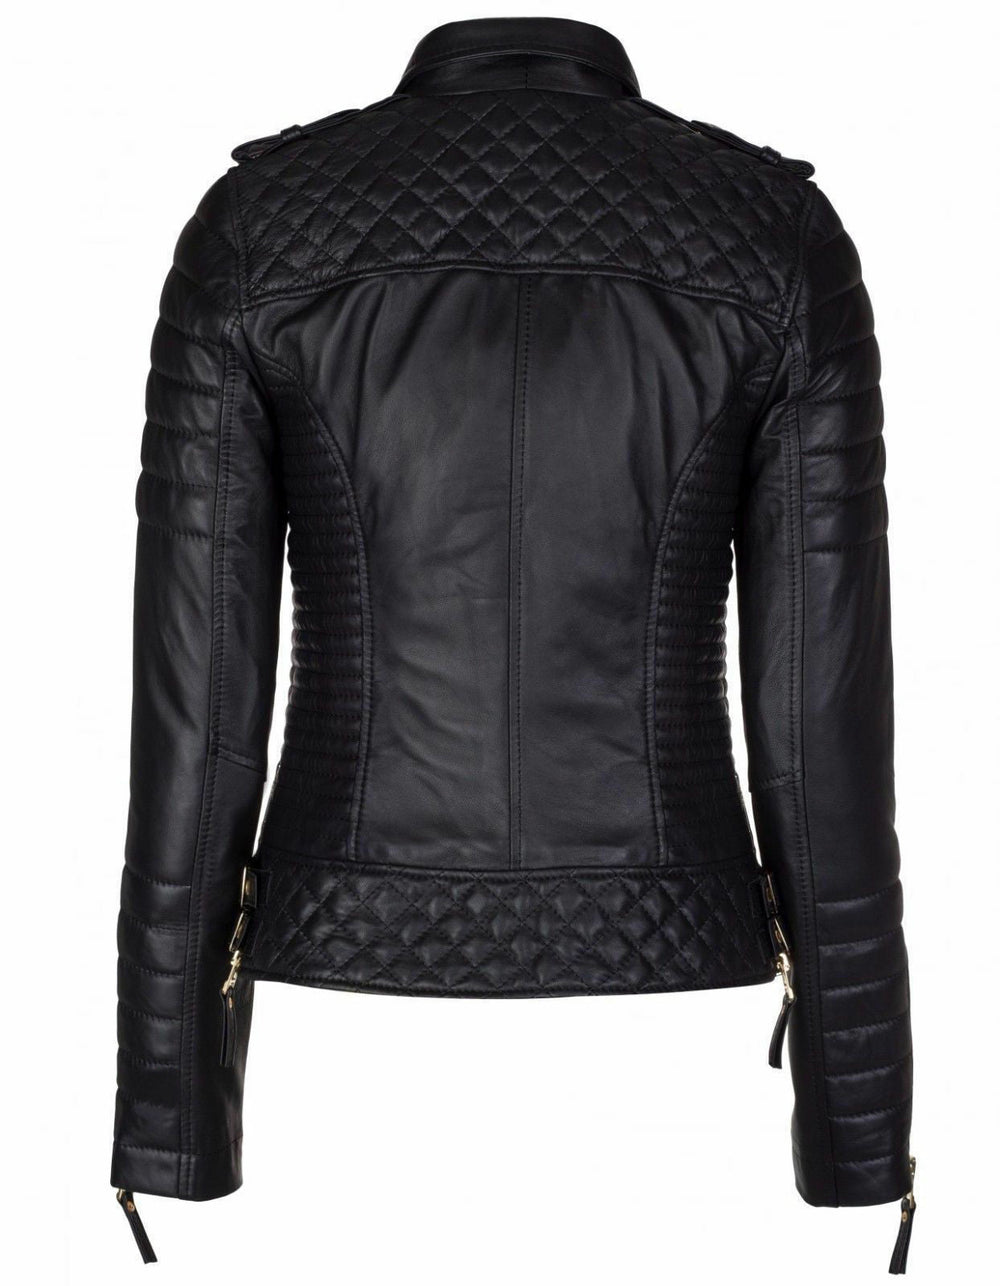 Lambskin Slim Fit Black Leather Women's Jacket| All For Me Today